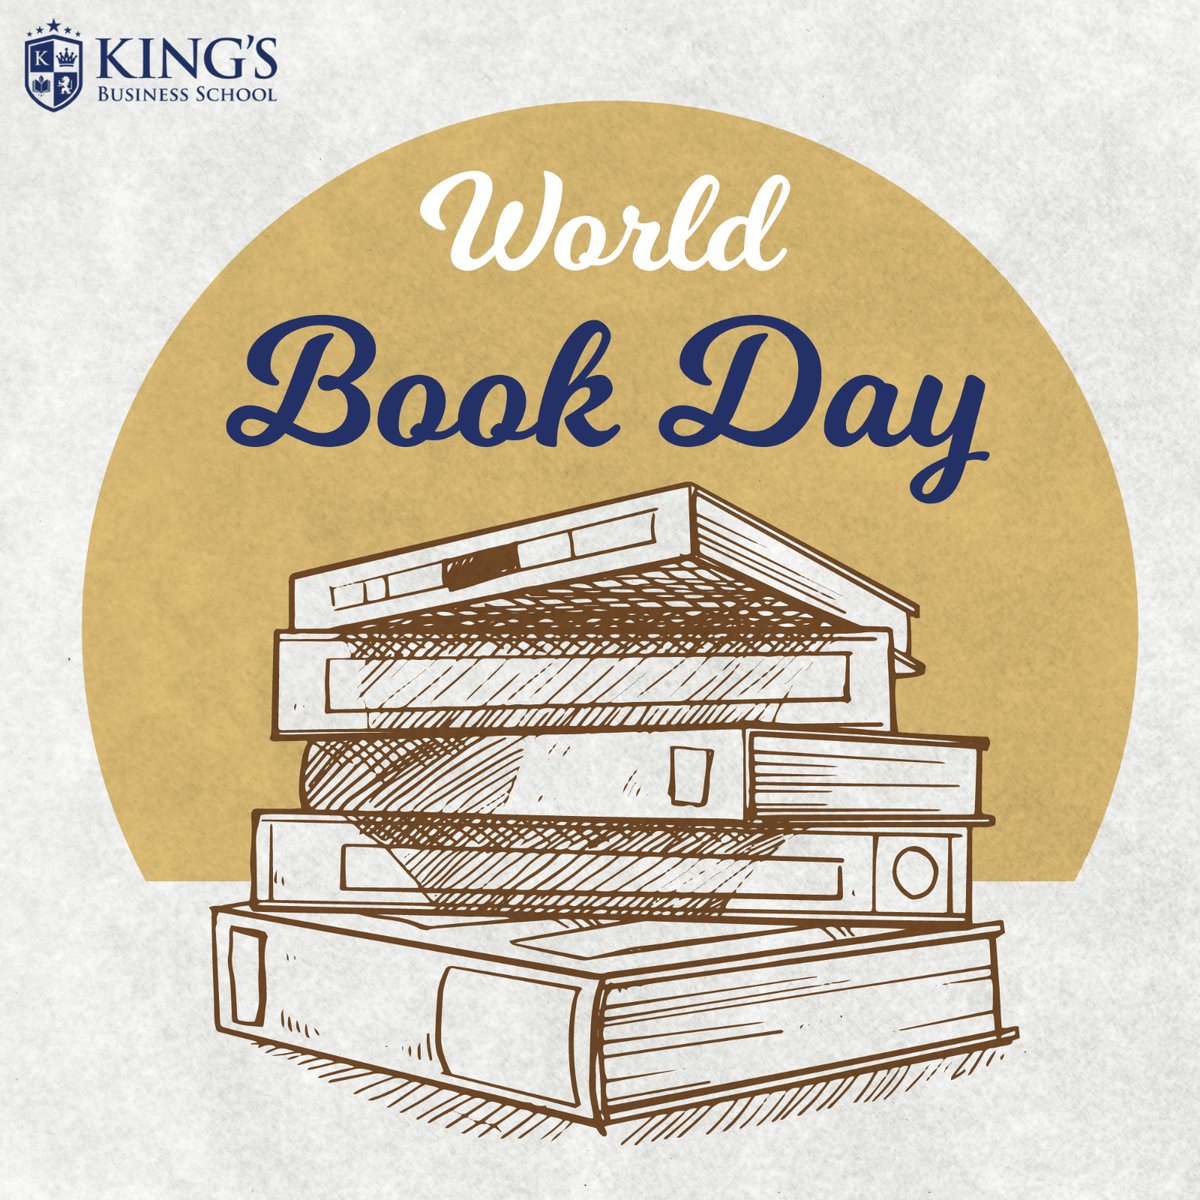 Today, let's celebrate the power of books to inspire, educate, and entertain. Happy World Book Day!

#worldbookday2024 #worldbookday #inspire #educate #powerofbooks #kingsbusinessschool